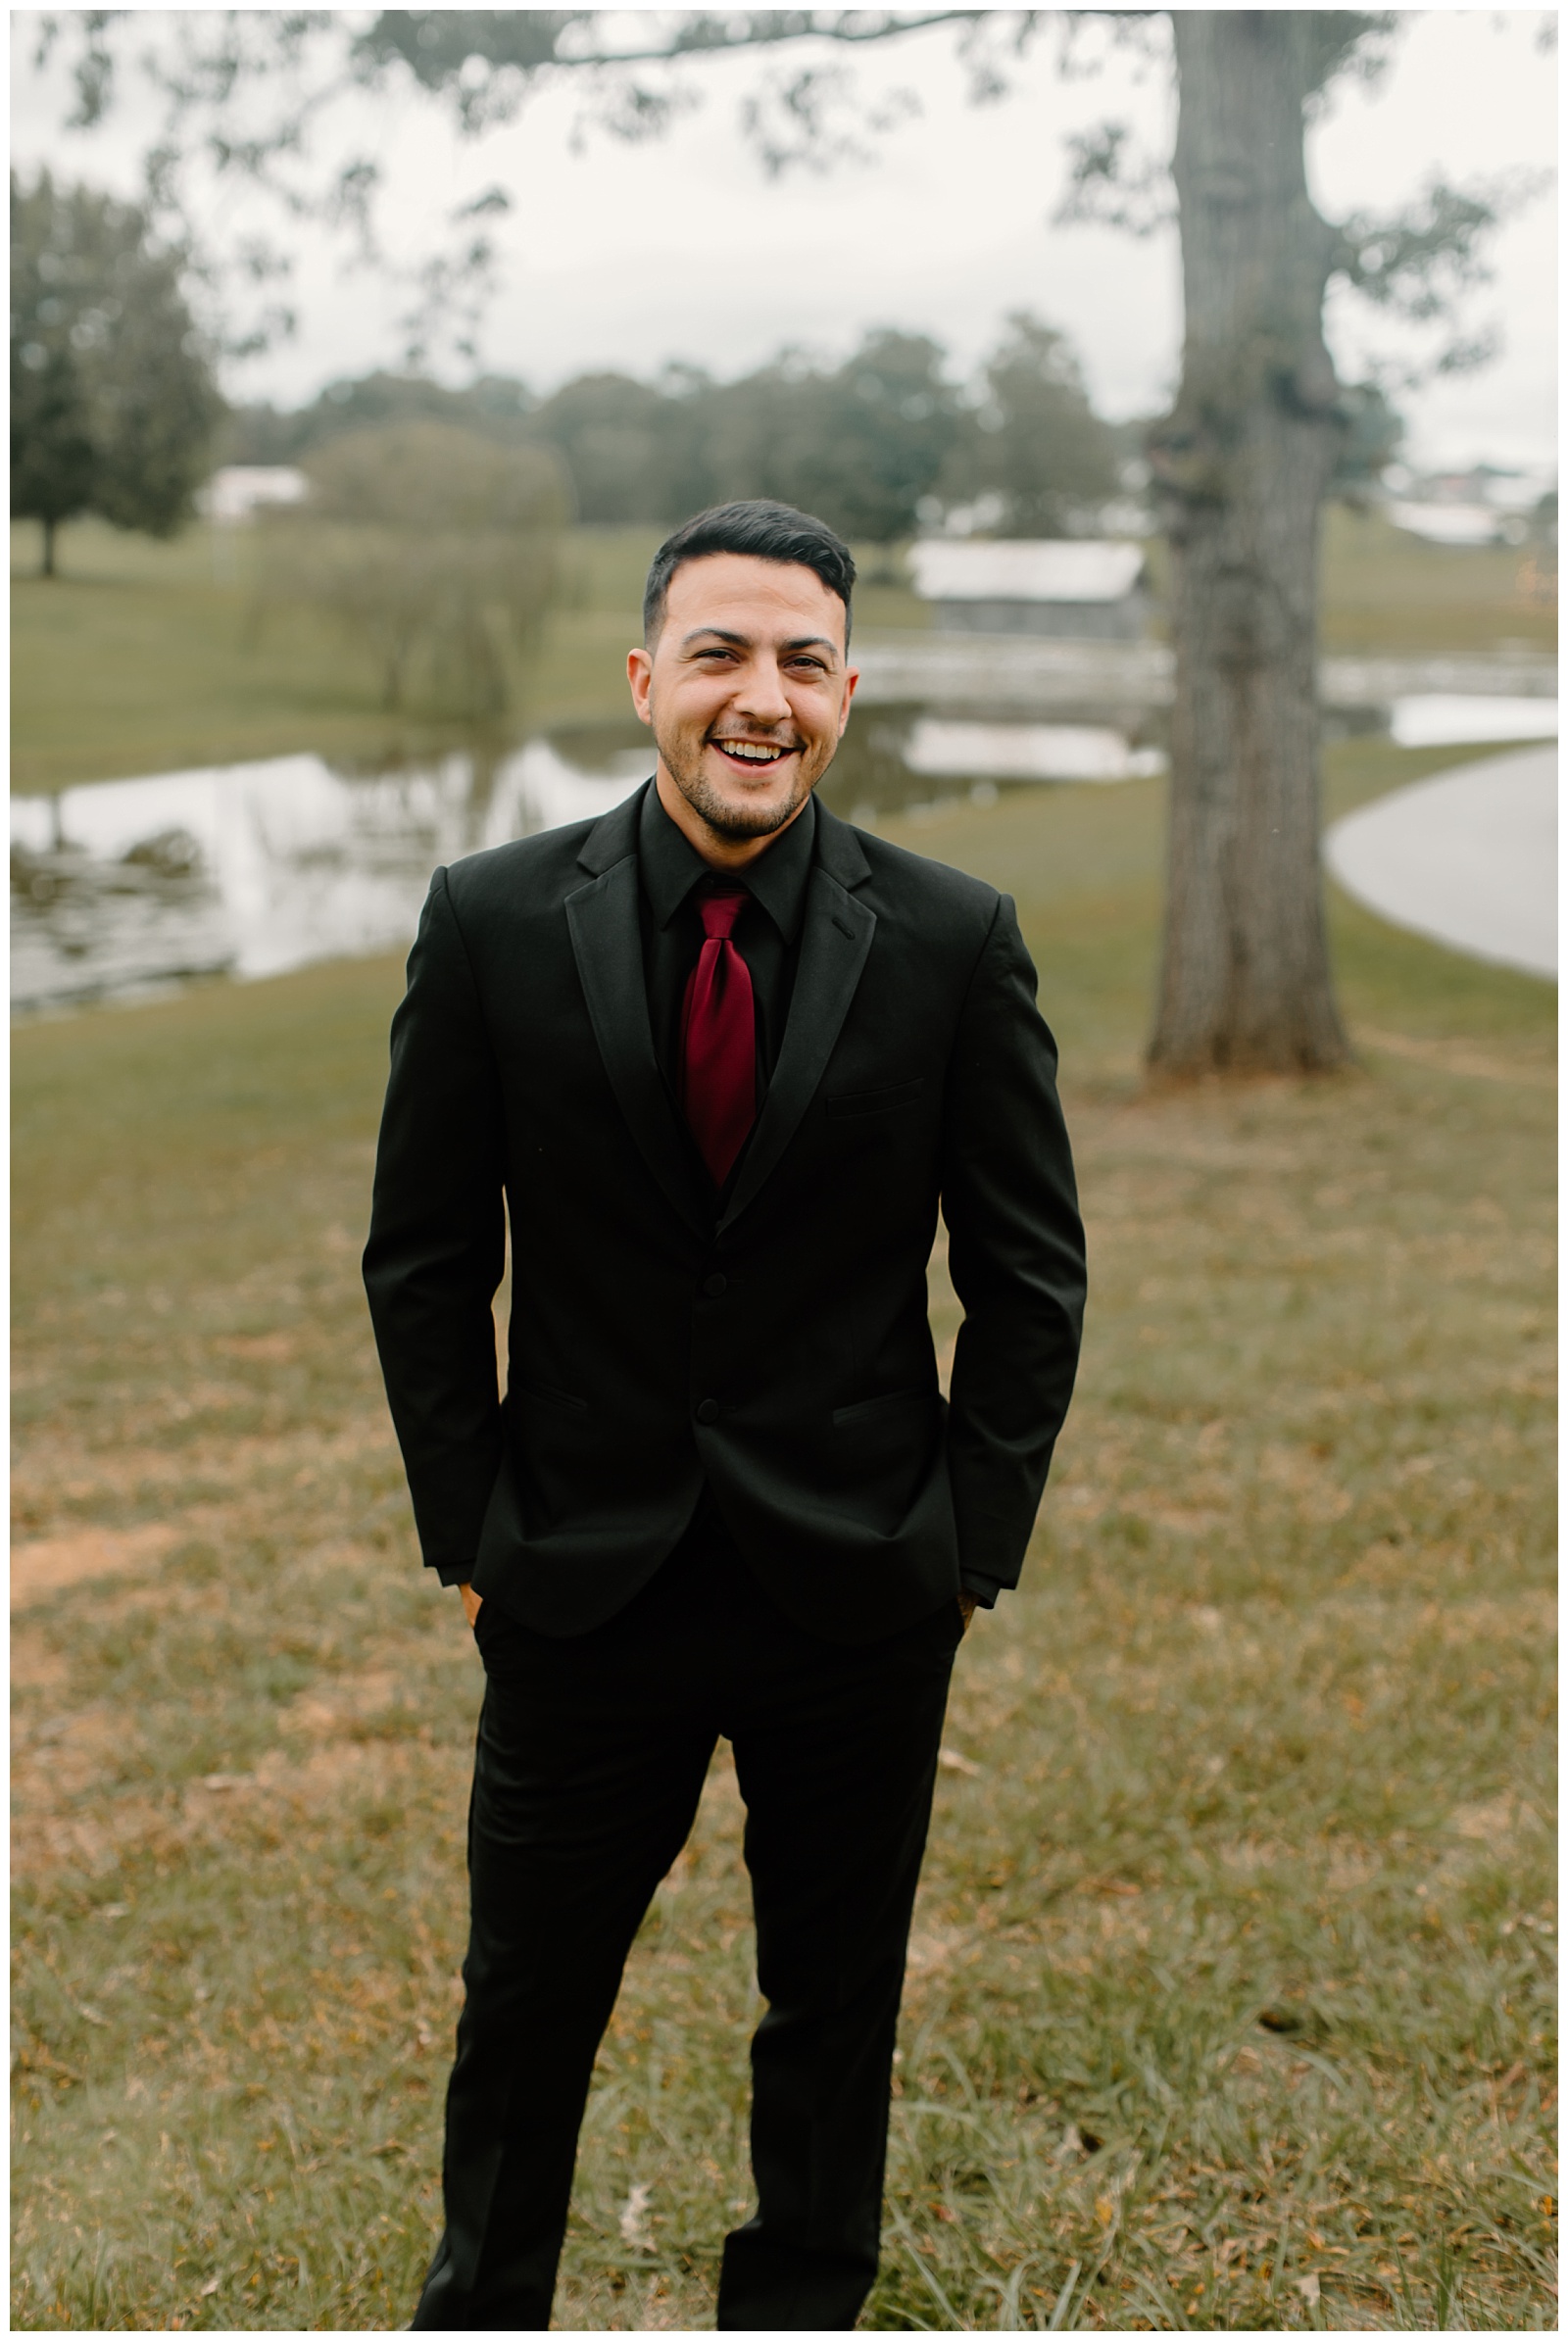 Portrait of a Groom outside by a small pond before his wedding. He is wearing a black tailored suit, black shirt and pants, and a dark, bold bordeaux tie.